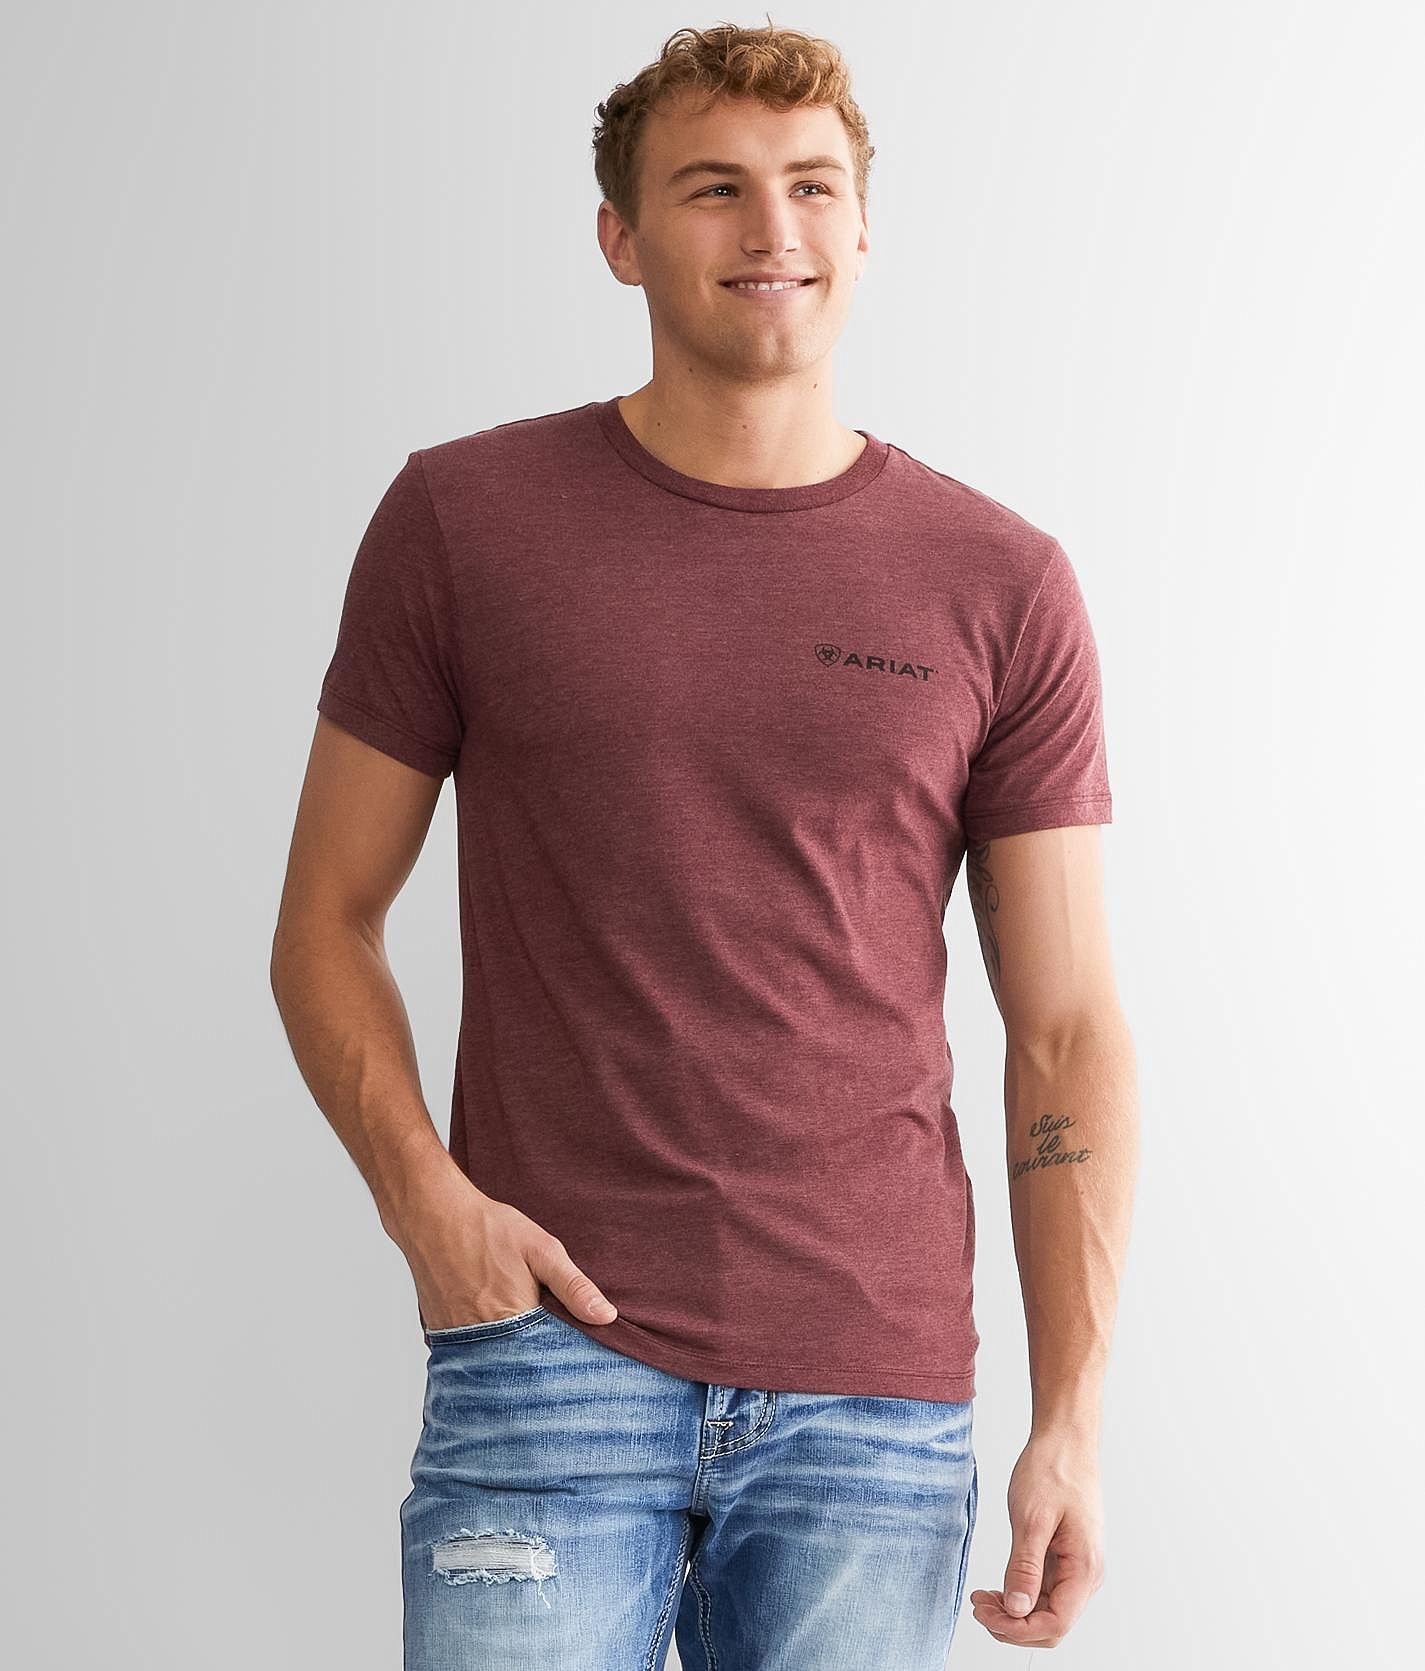 Ariat Pocket V1 T-Shirt  - Red - male - Size: Small